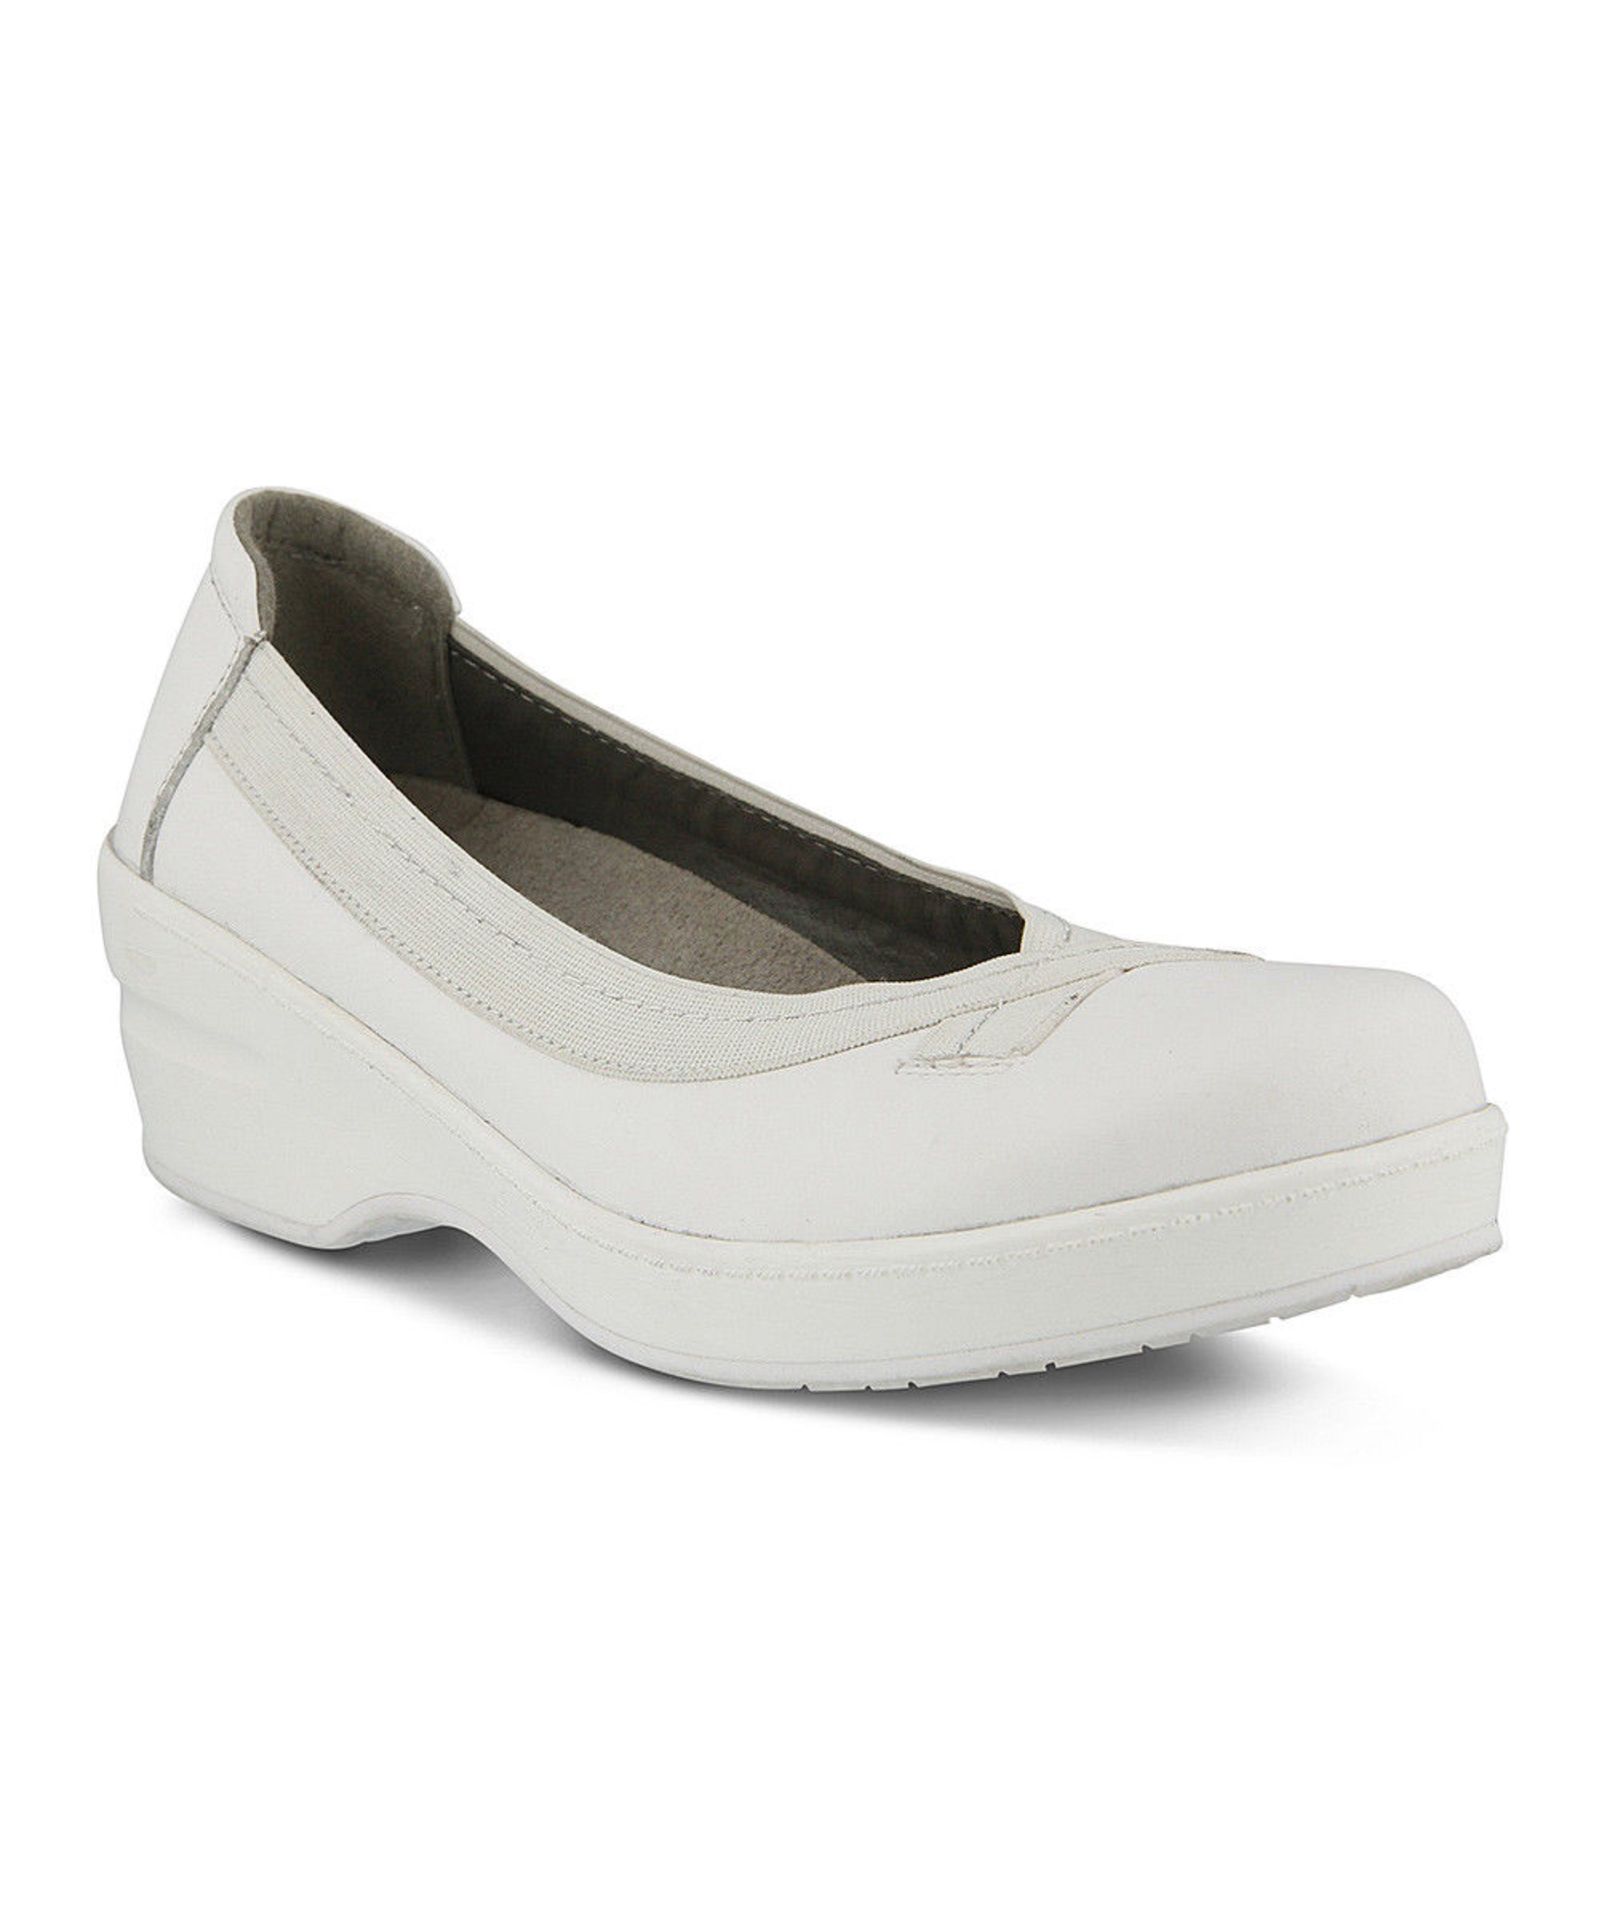 Spring Step Professional, White Belabank Leather Flat, Size Uk 6-6.5W Us 8.5 (New With Box) [Ref: